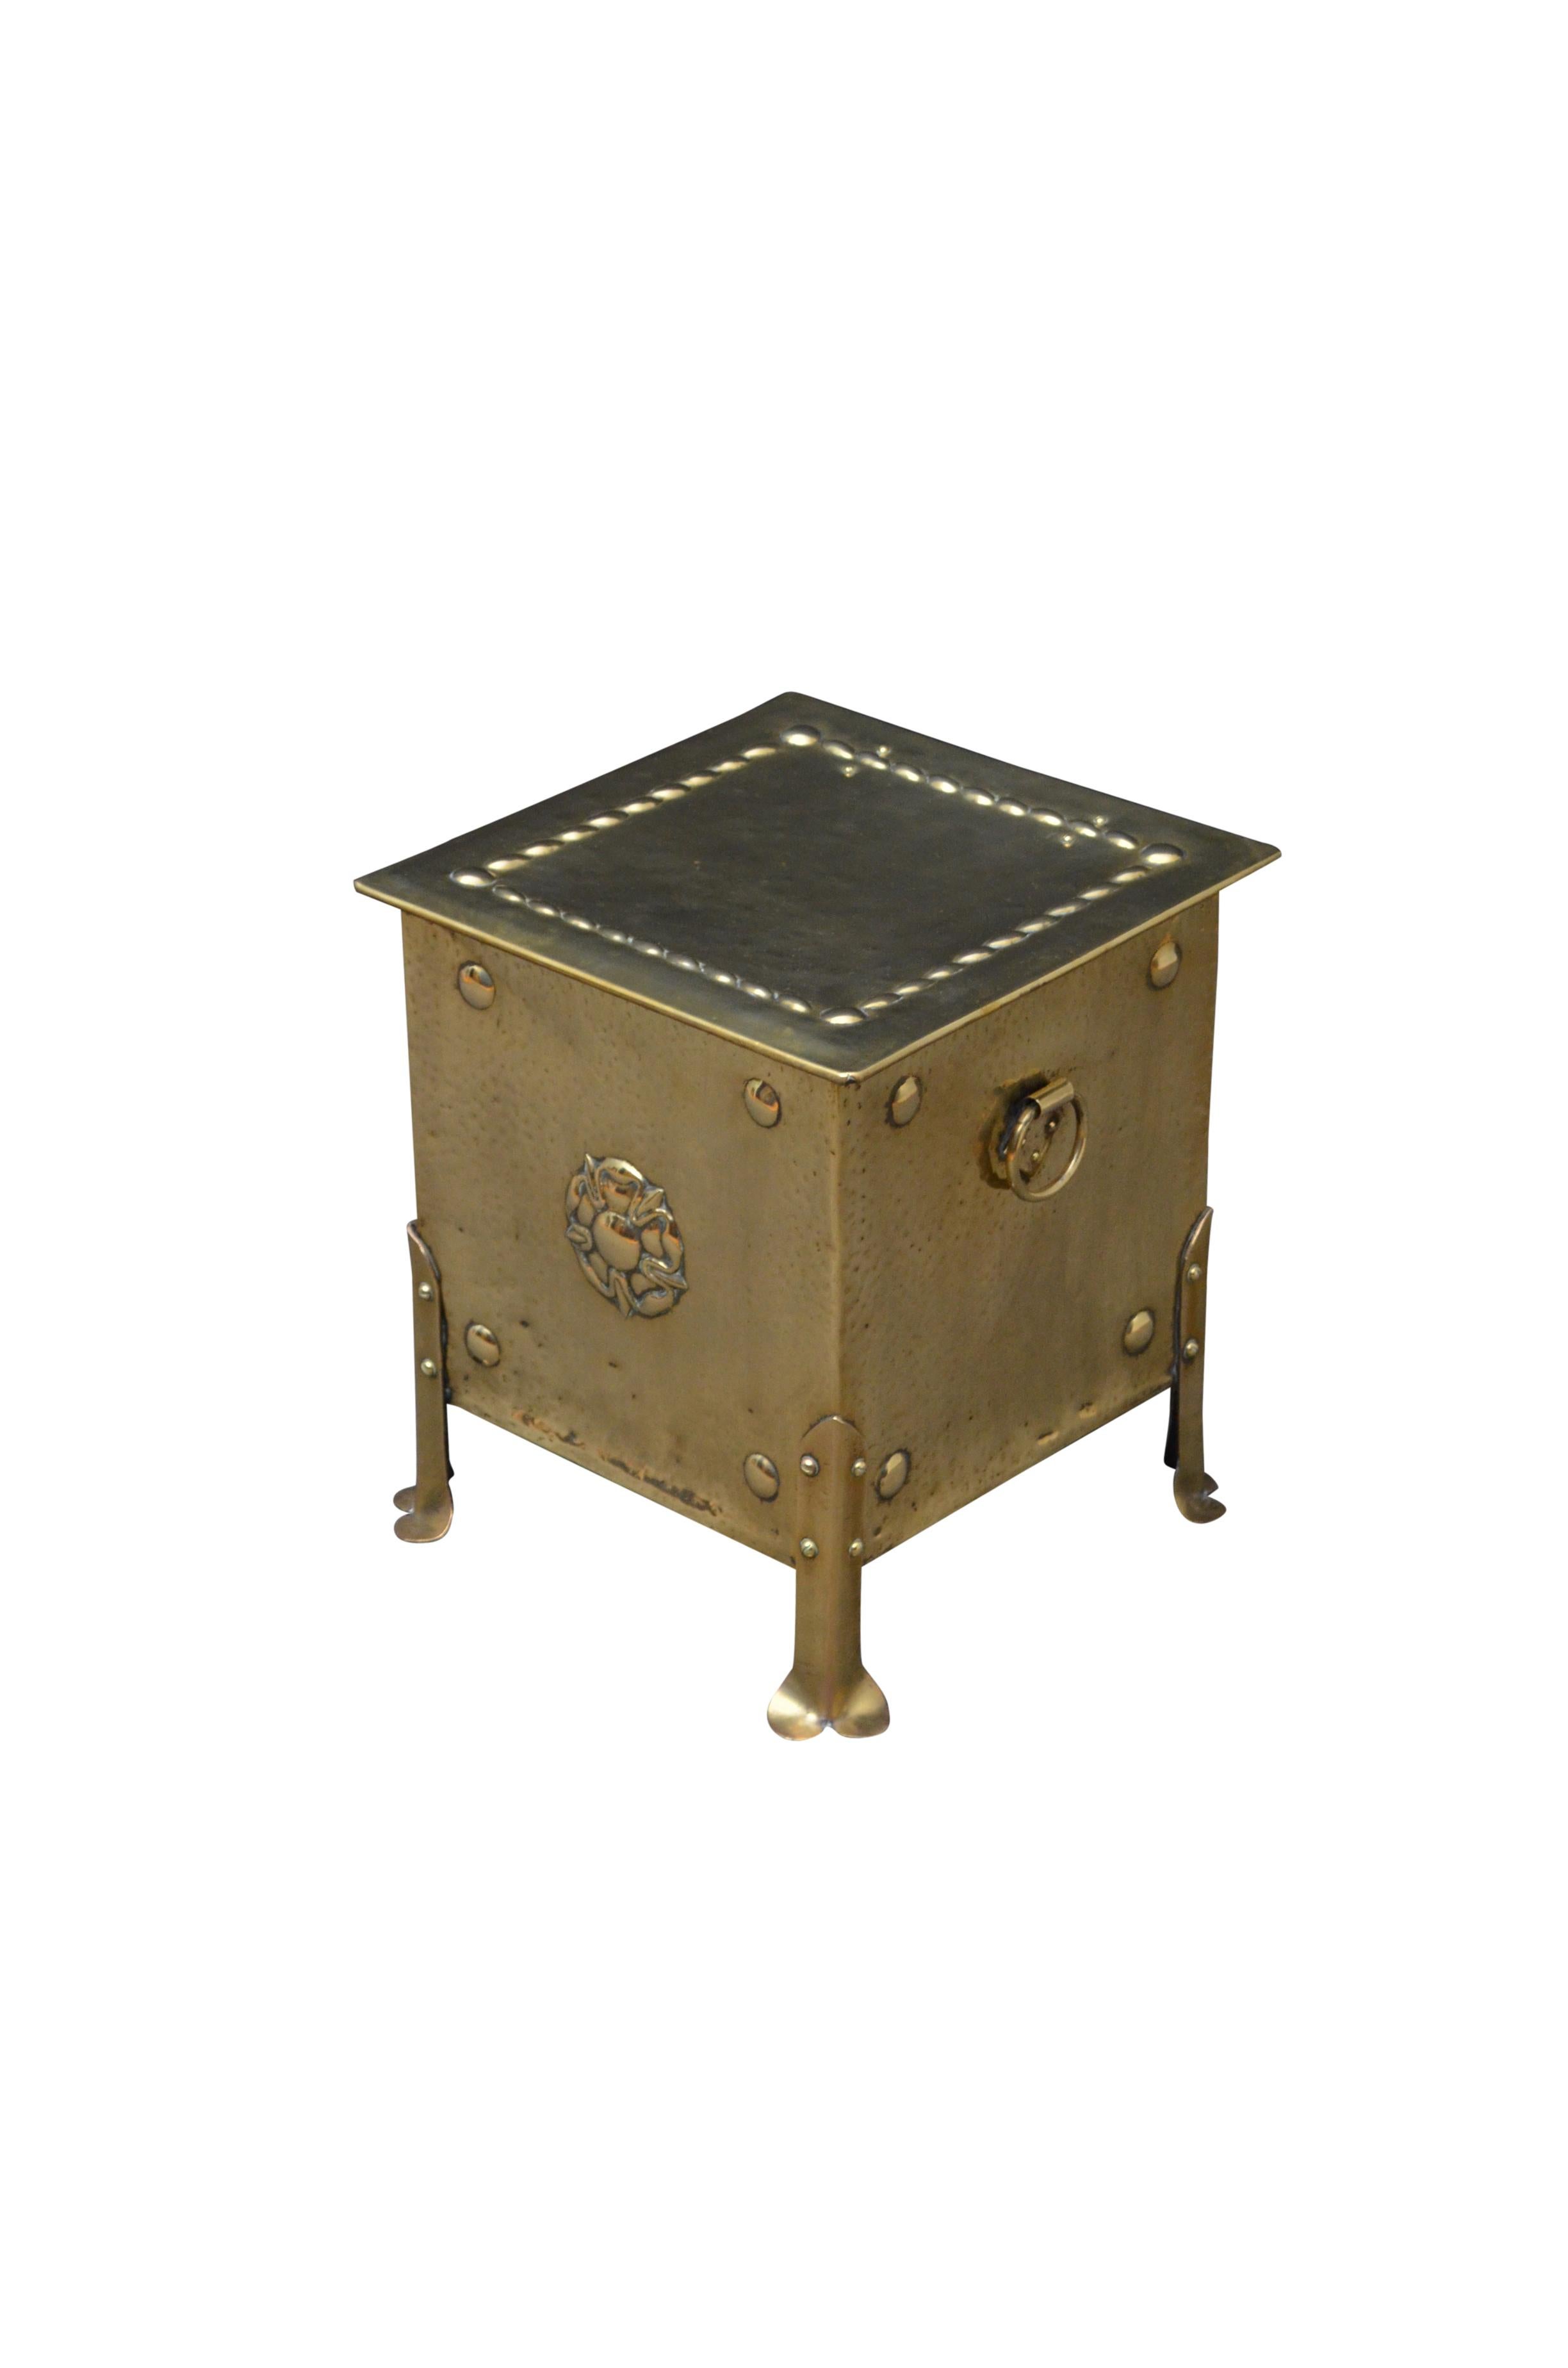 Arts & Crafts coal bin with embossed decoration, carrying handles and pad feet. This antique coal scuttle would make a goo planter. c1900
Measures: H 14